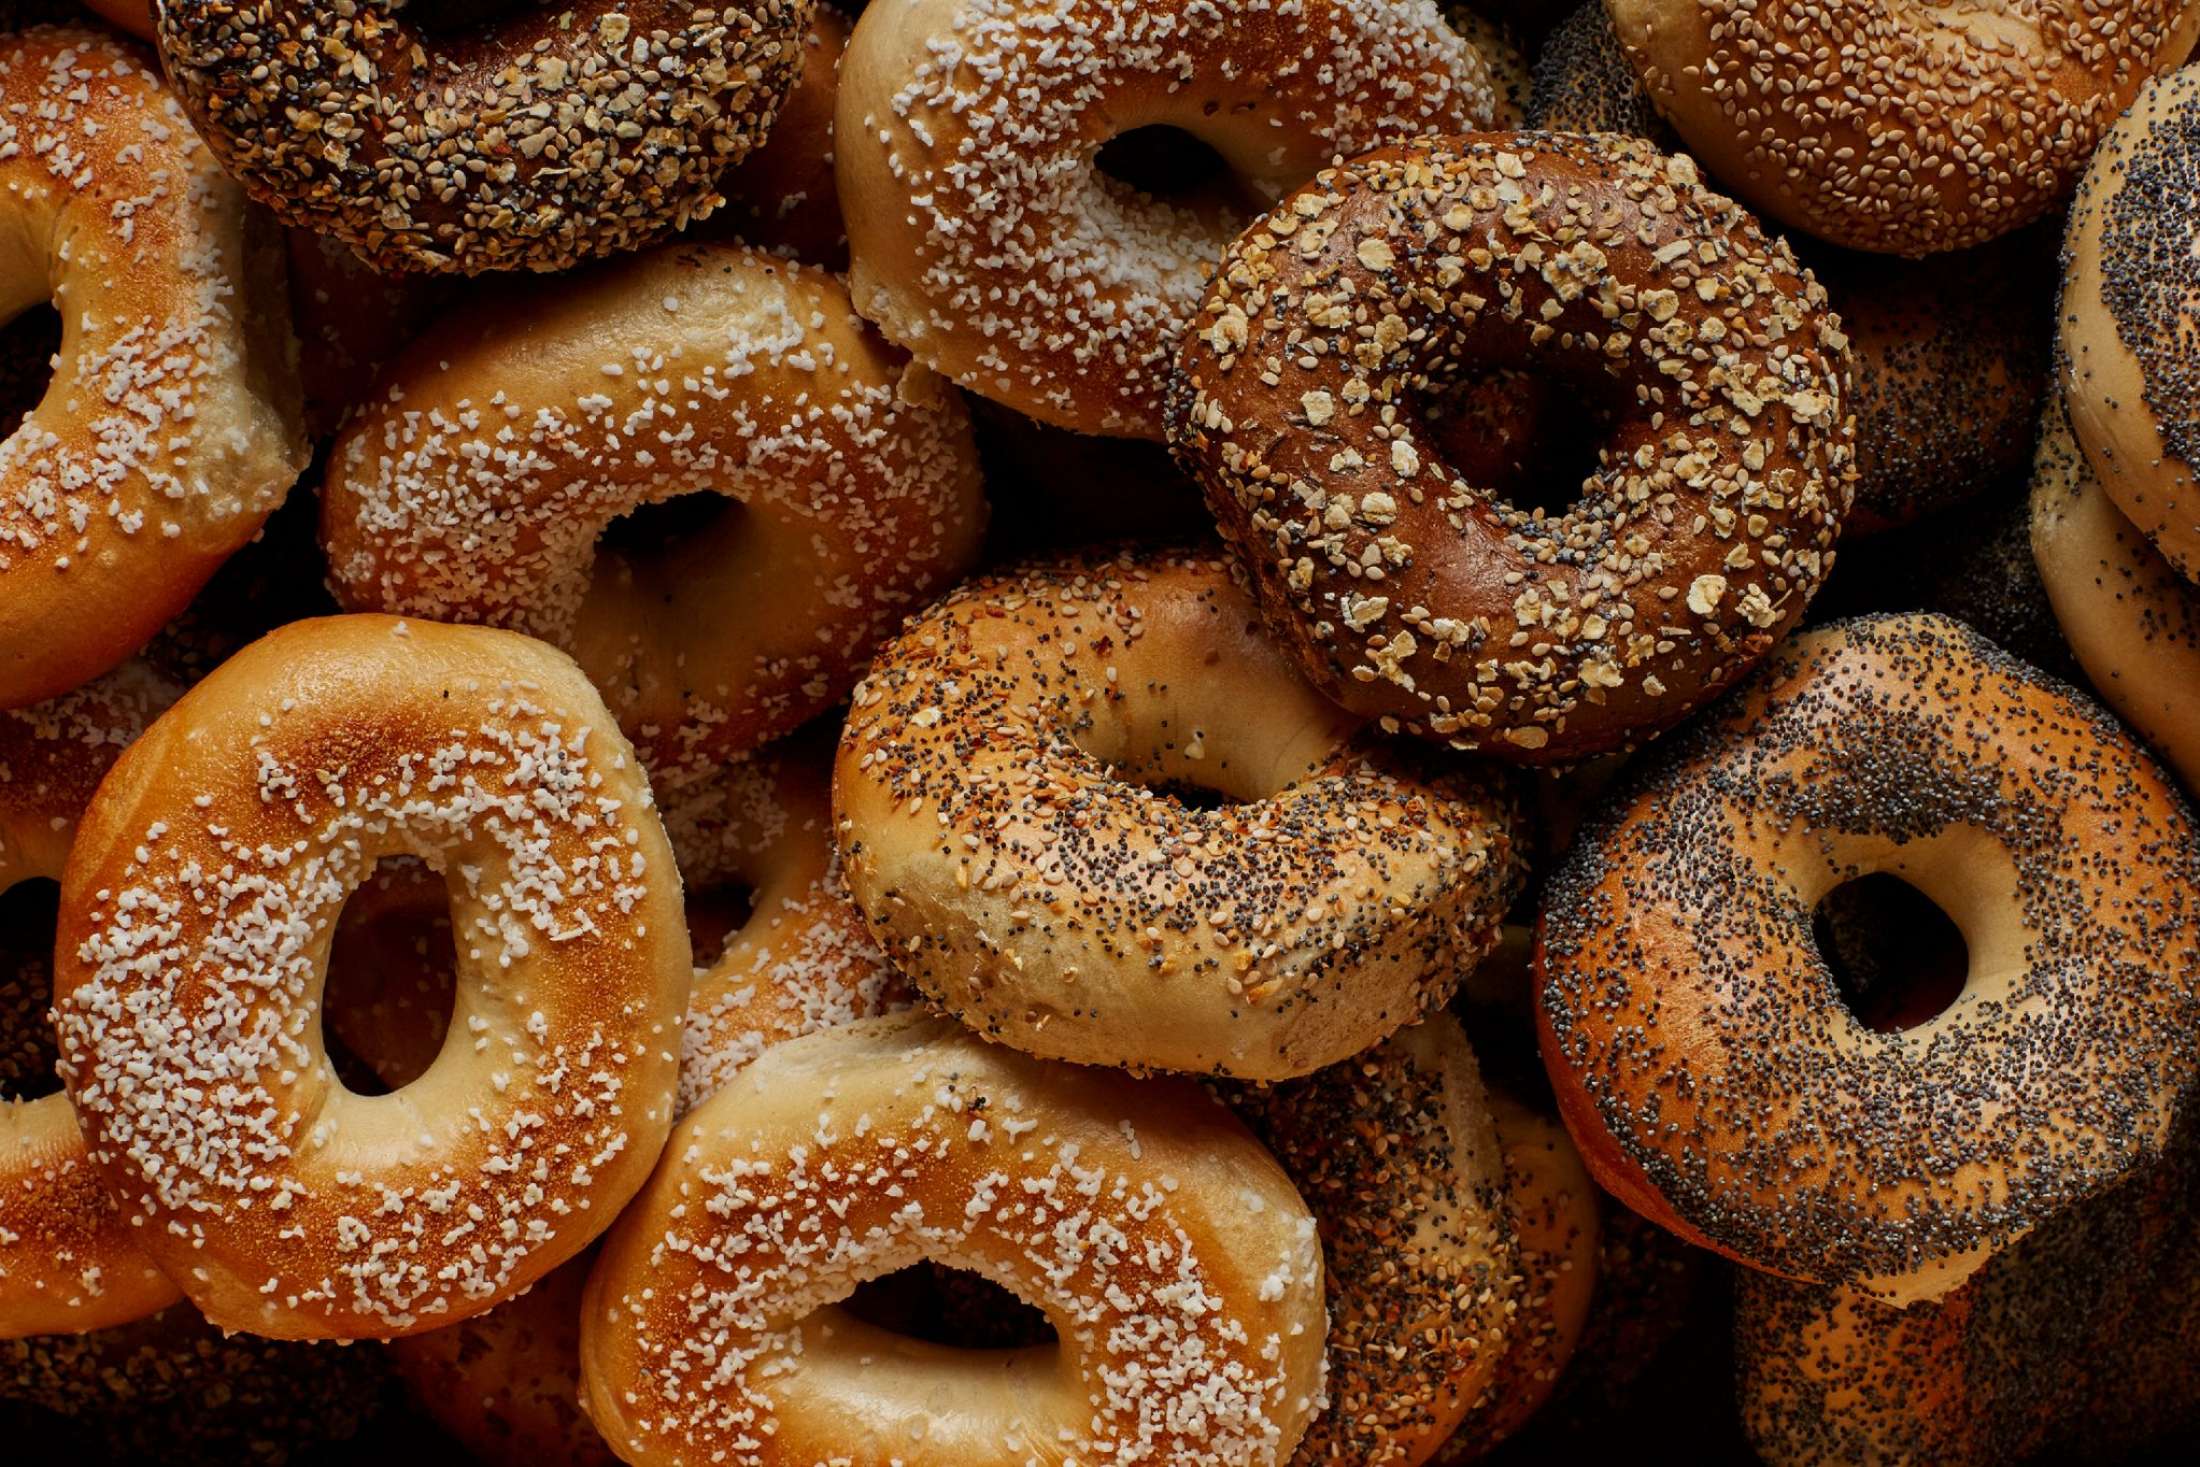 I wanted a real NYC bagel. Was it worth it to get two dozen shipped across the country?